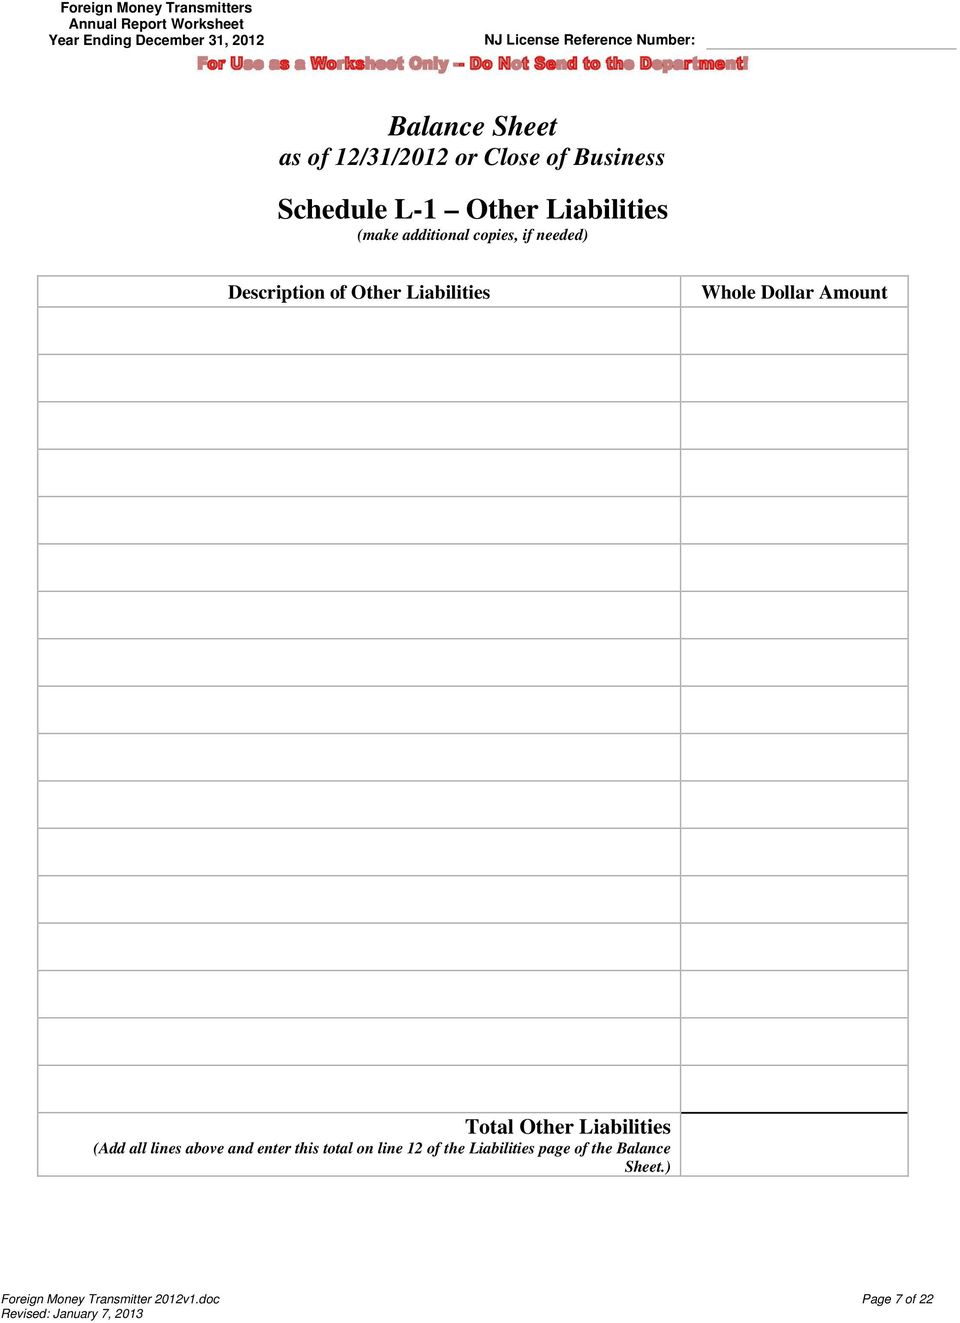 Liabilities (Add all lines above and enter this total on line 12 of the